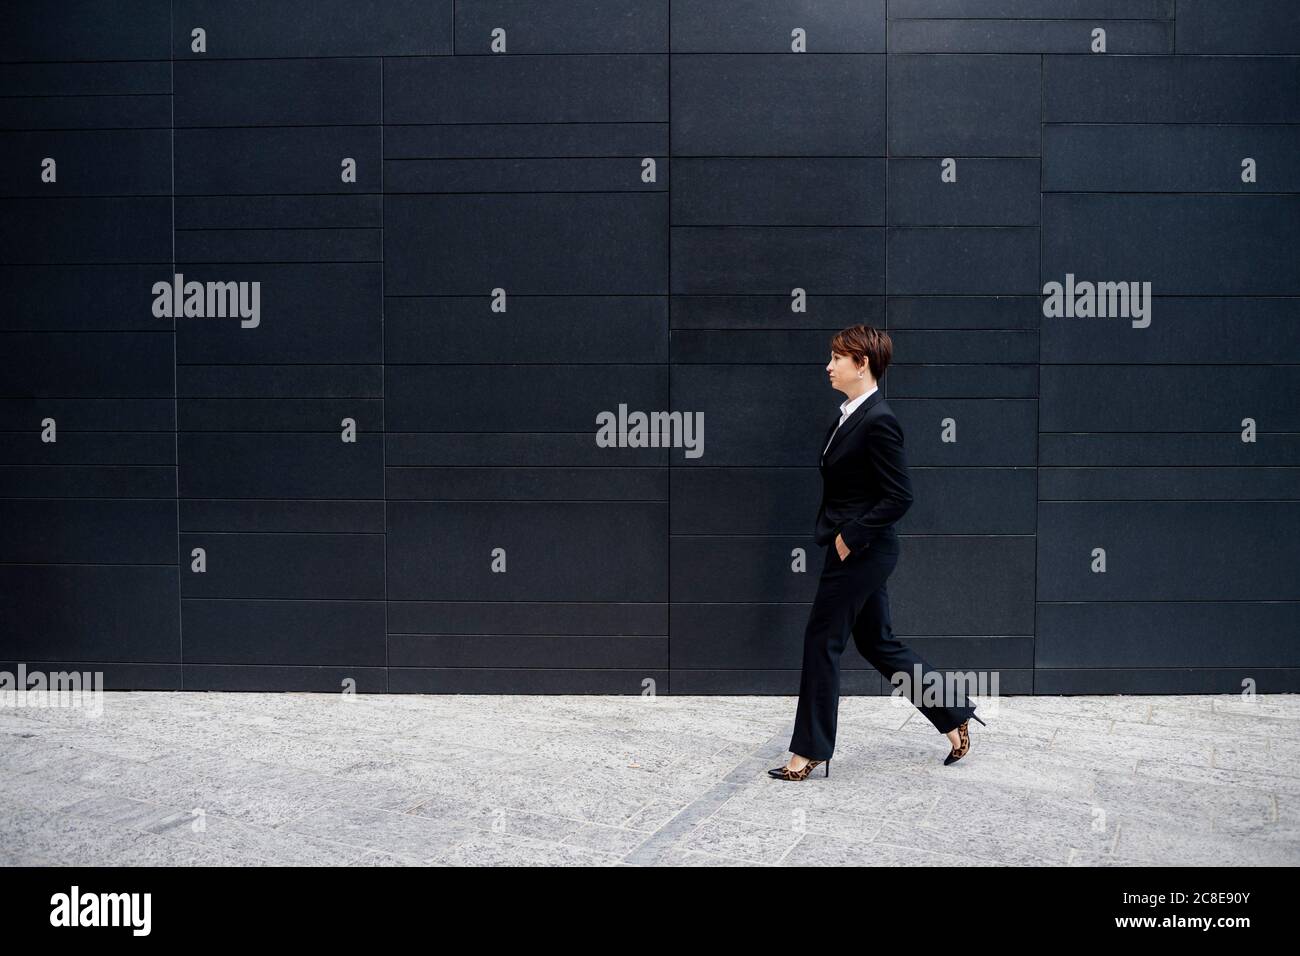 Businesswoman with short hair walking on sidewalk by modern building in city Stock Photo